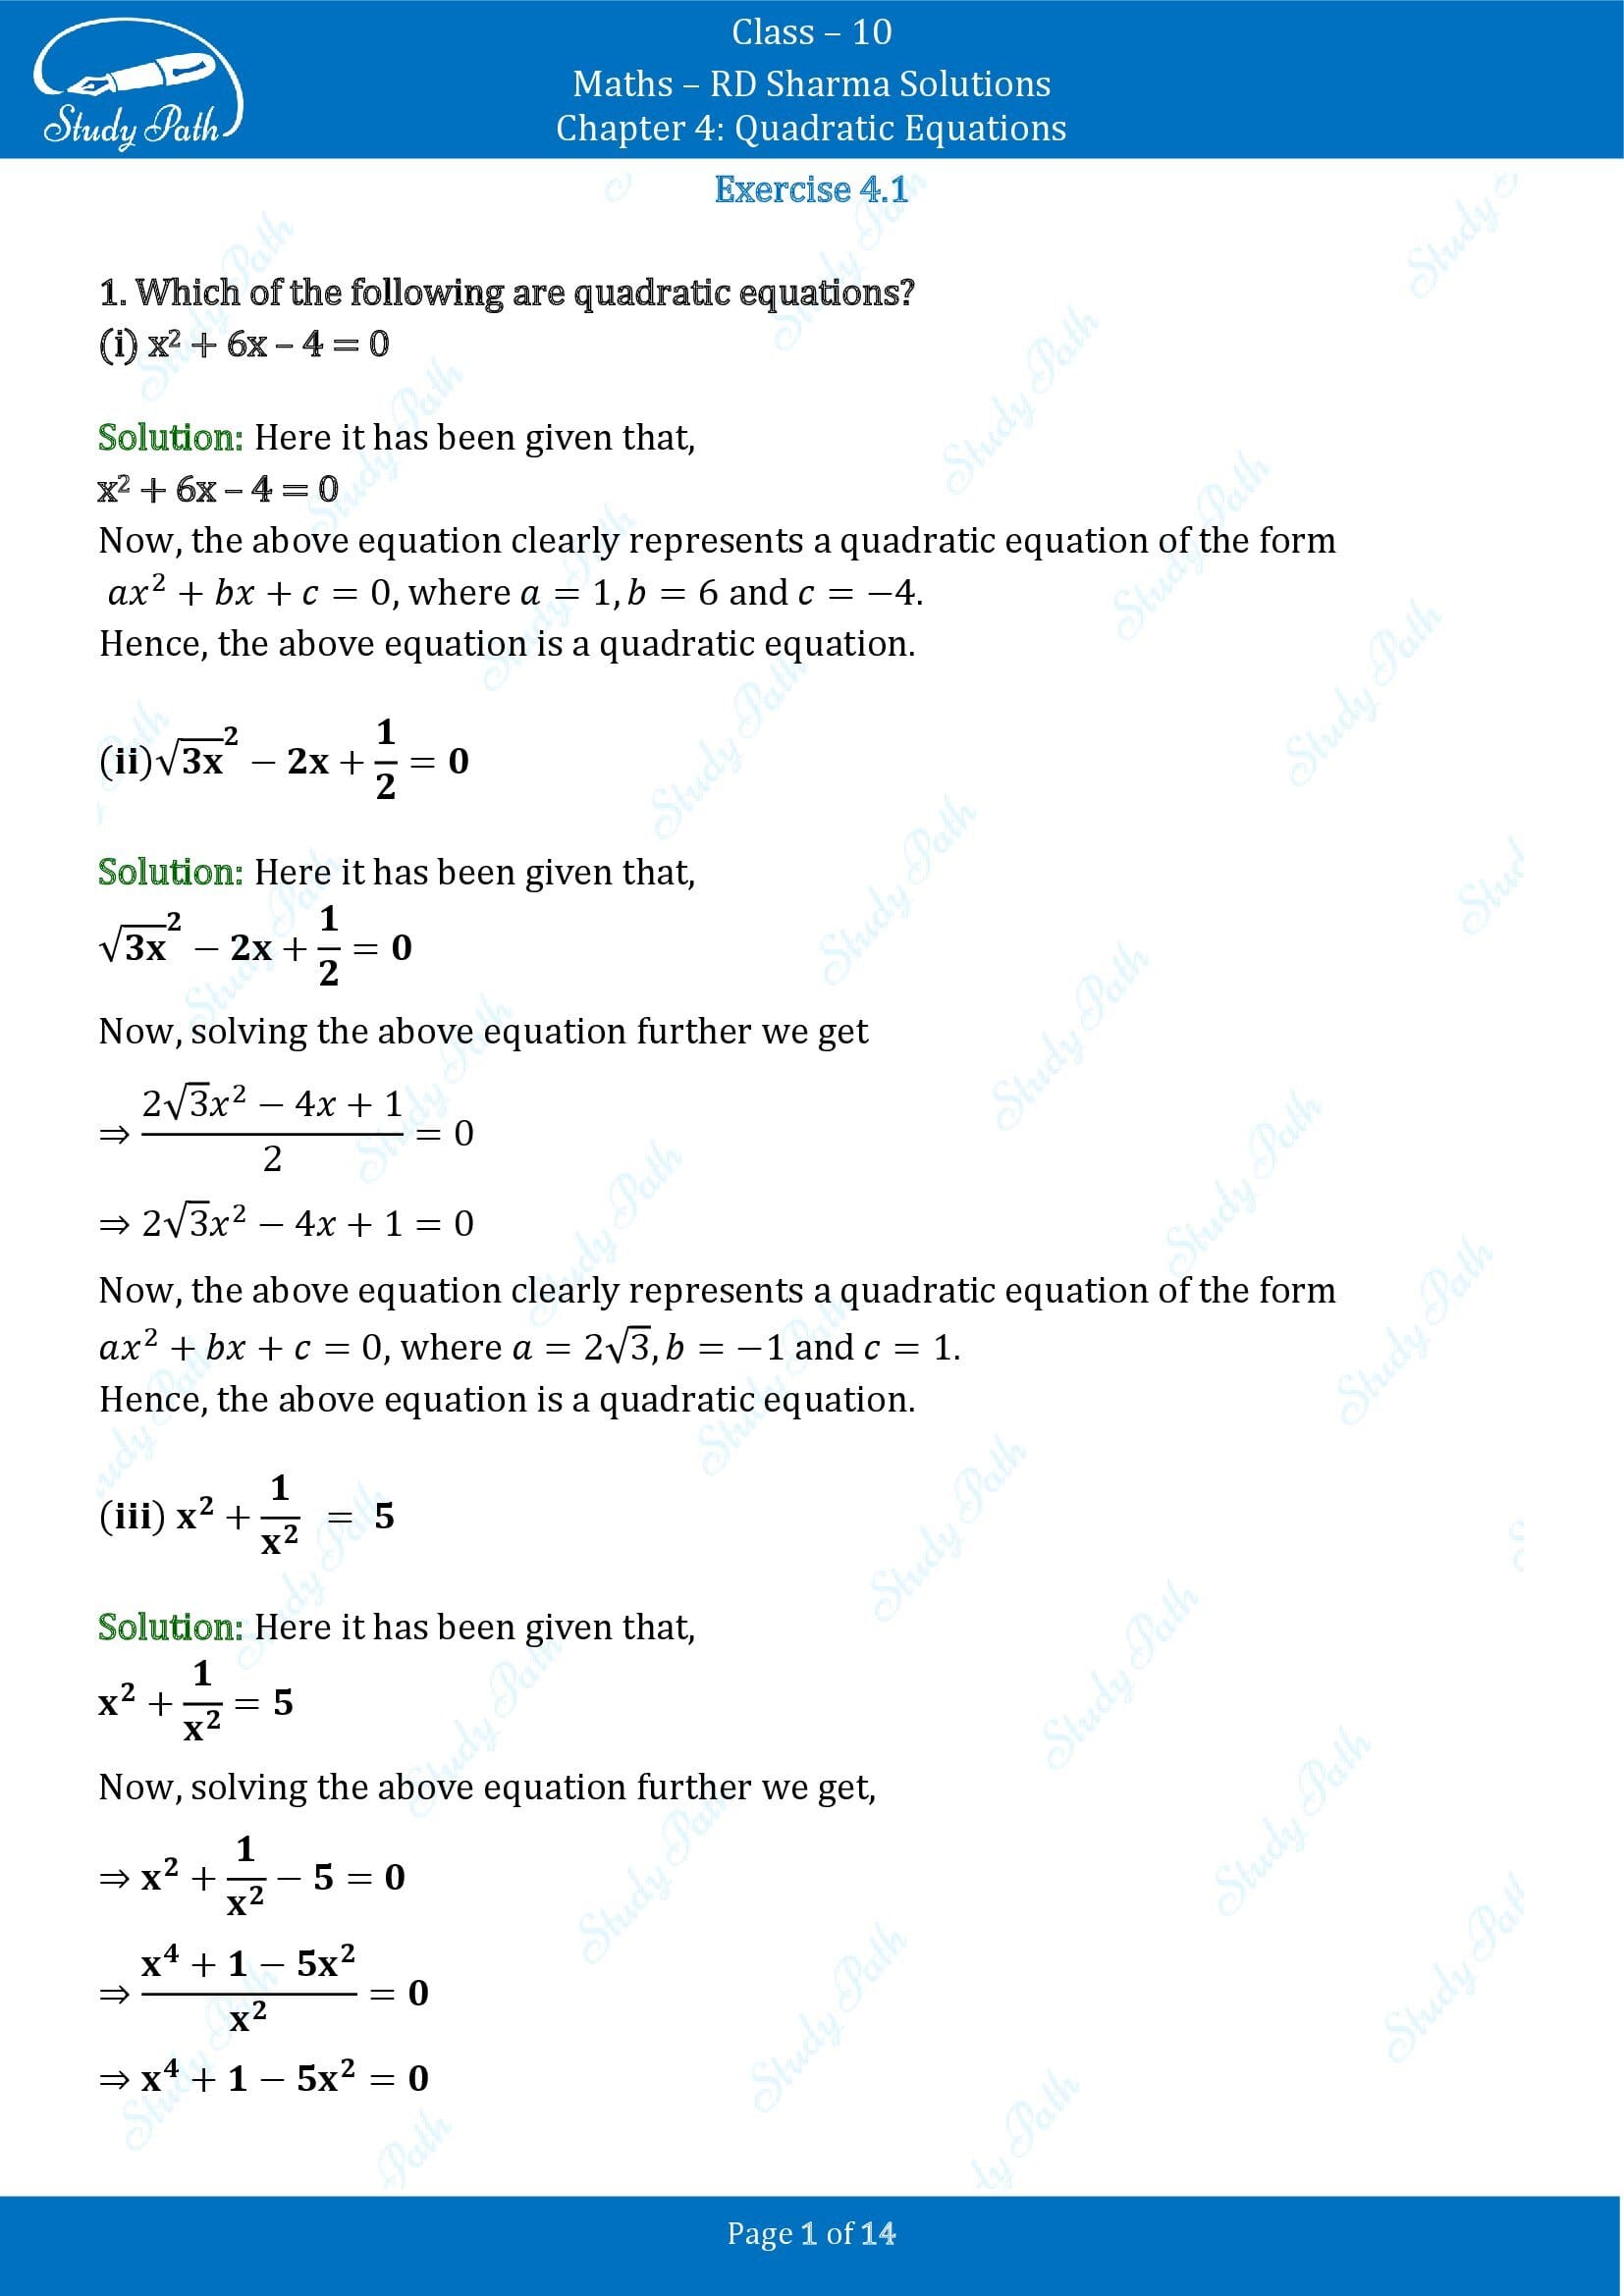 RD Sharma Solutions Class 10 Chapter 4 Quadratic Equations Exercise 4.1 00001